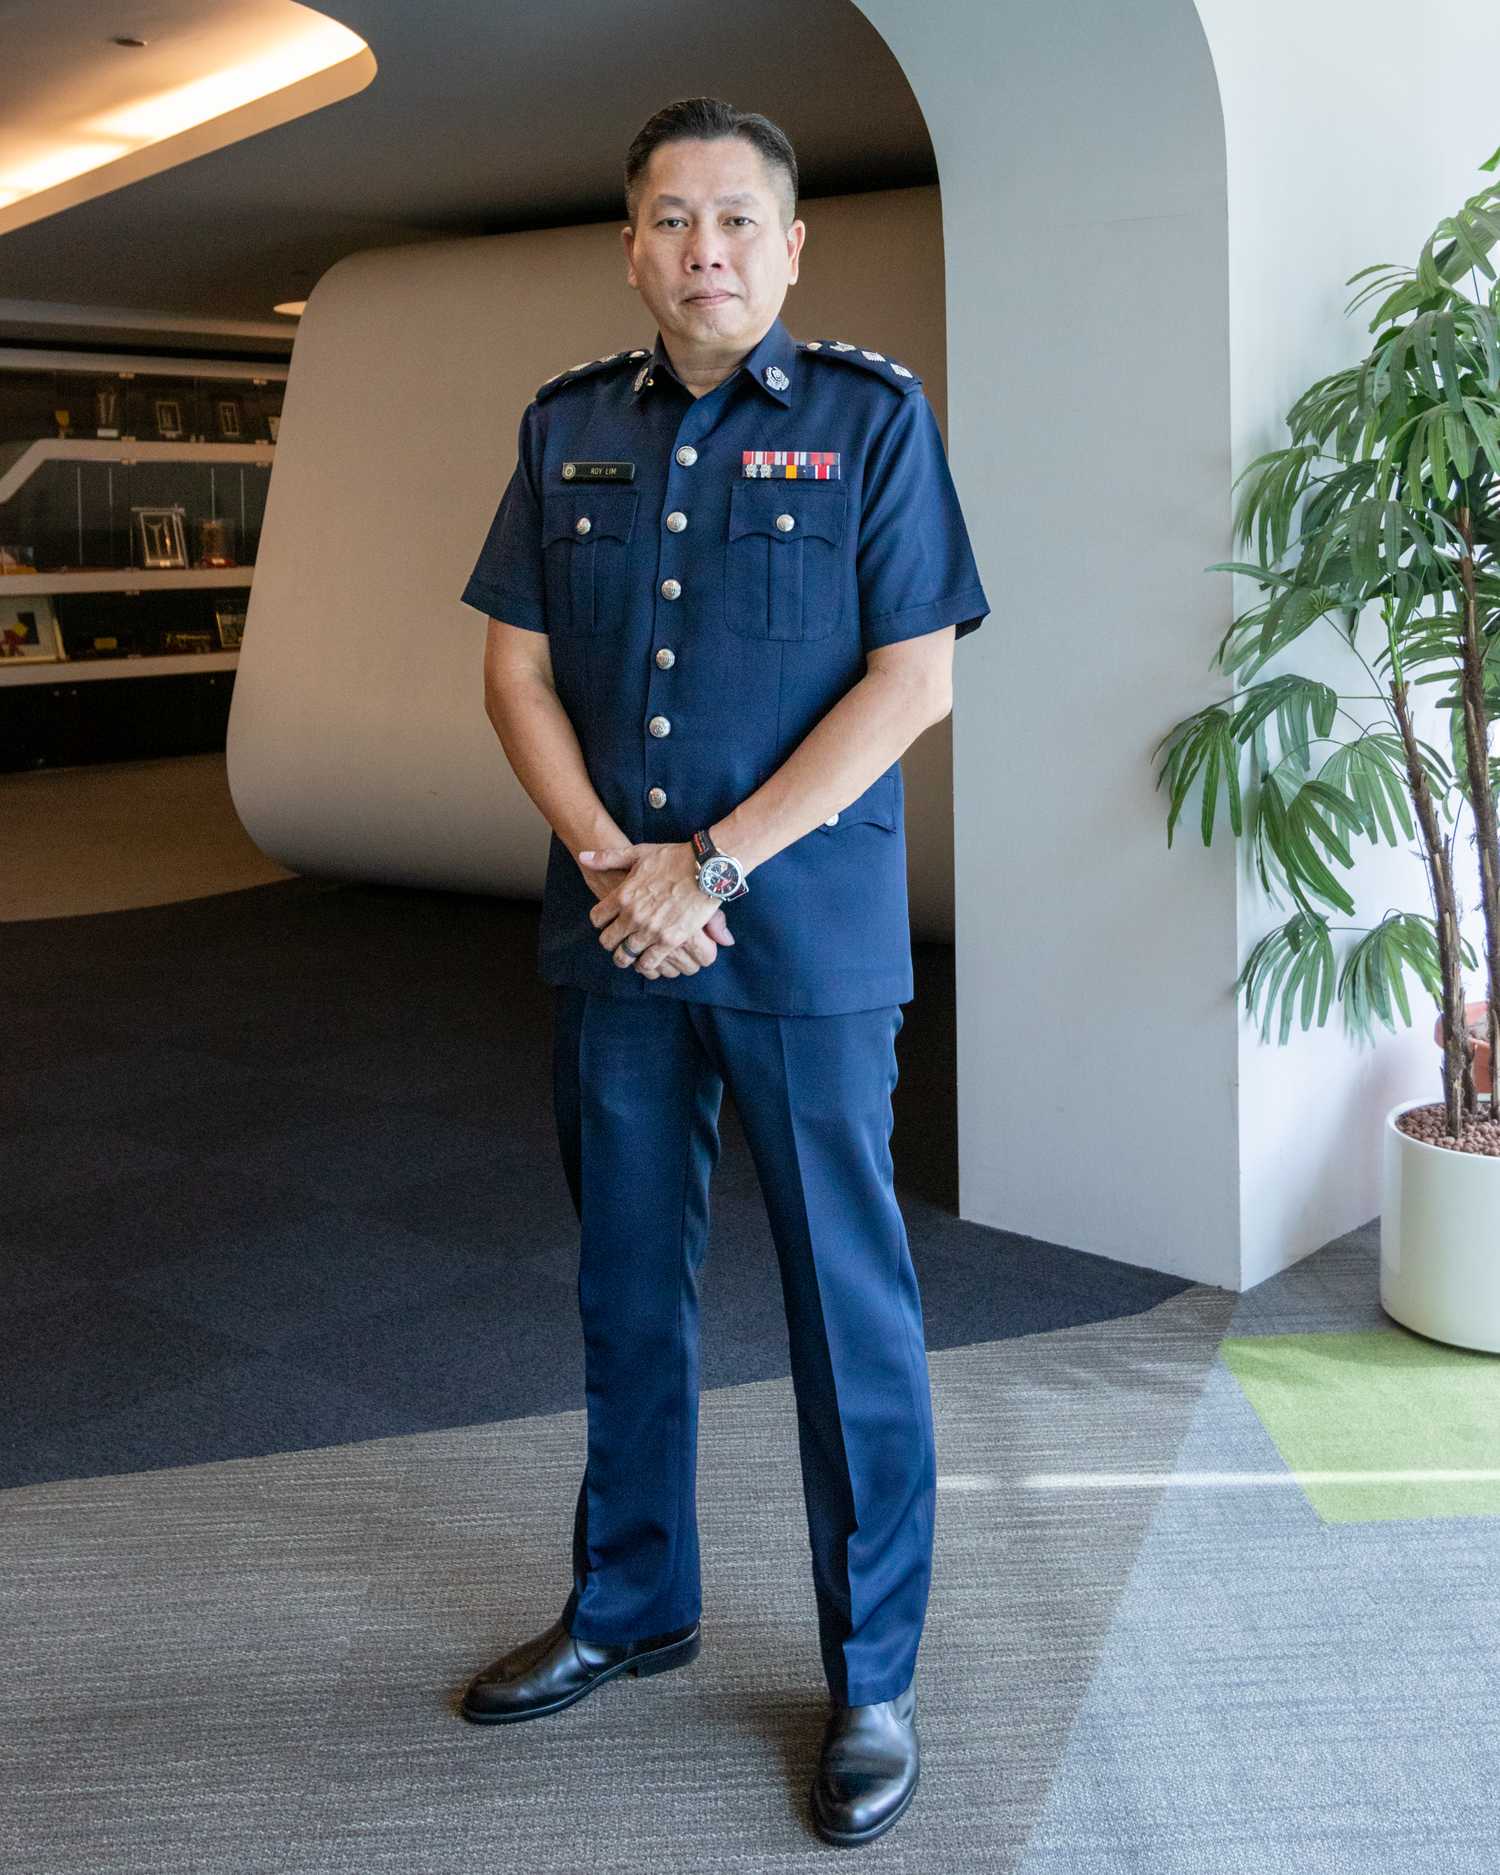 Superintendent of Police (Supt) Roy Lim is standing proudly looking at the camera in a profile shot, with his hands neatly placed in front of him.